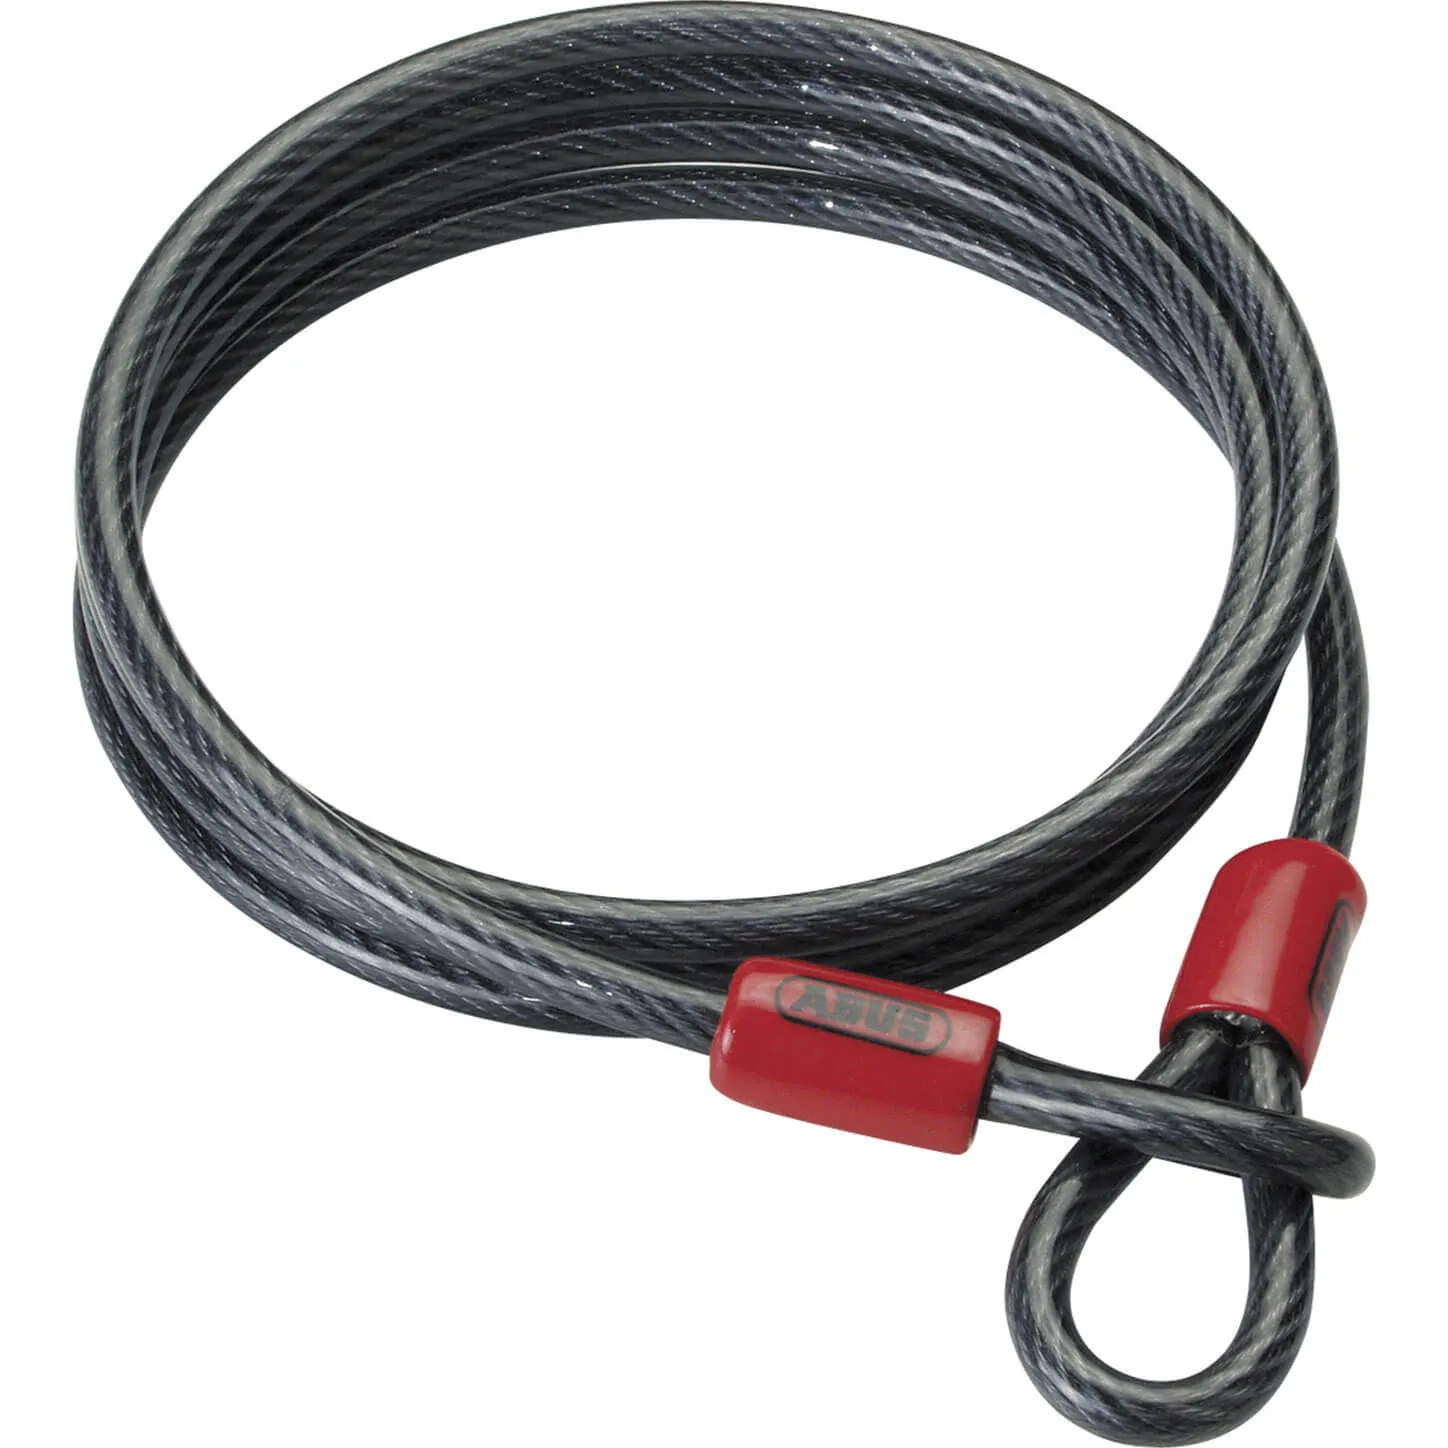 Abus Cobra Security Cable - 2000mm